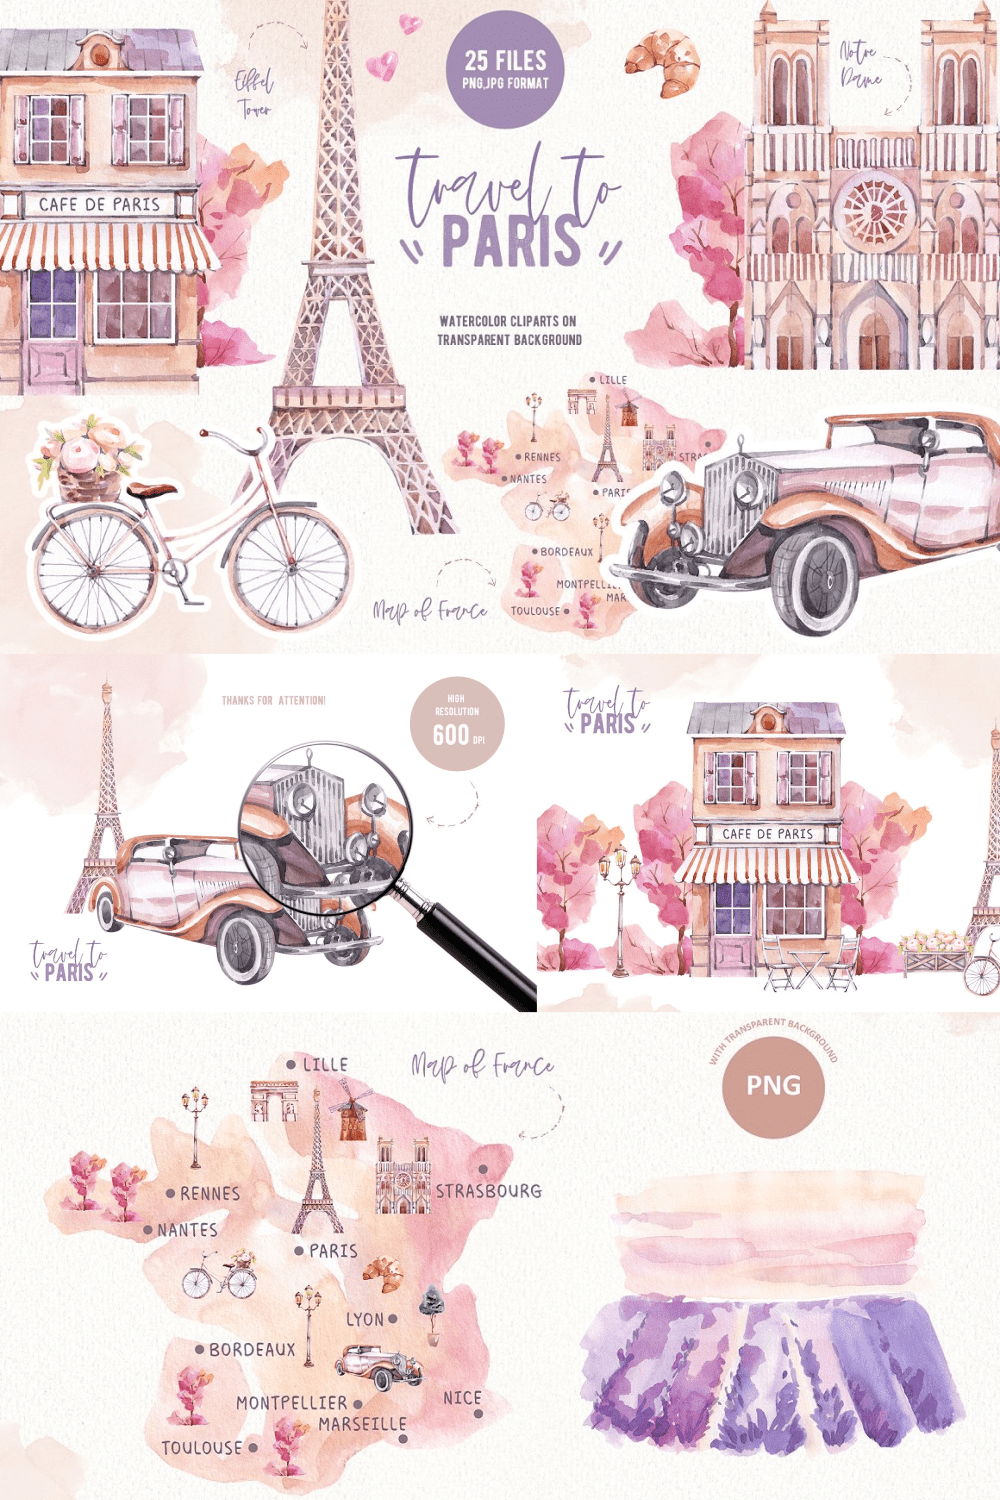 Travel To Paris Watercolor Clipart pin1.